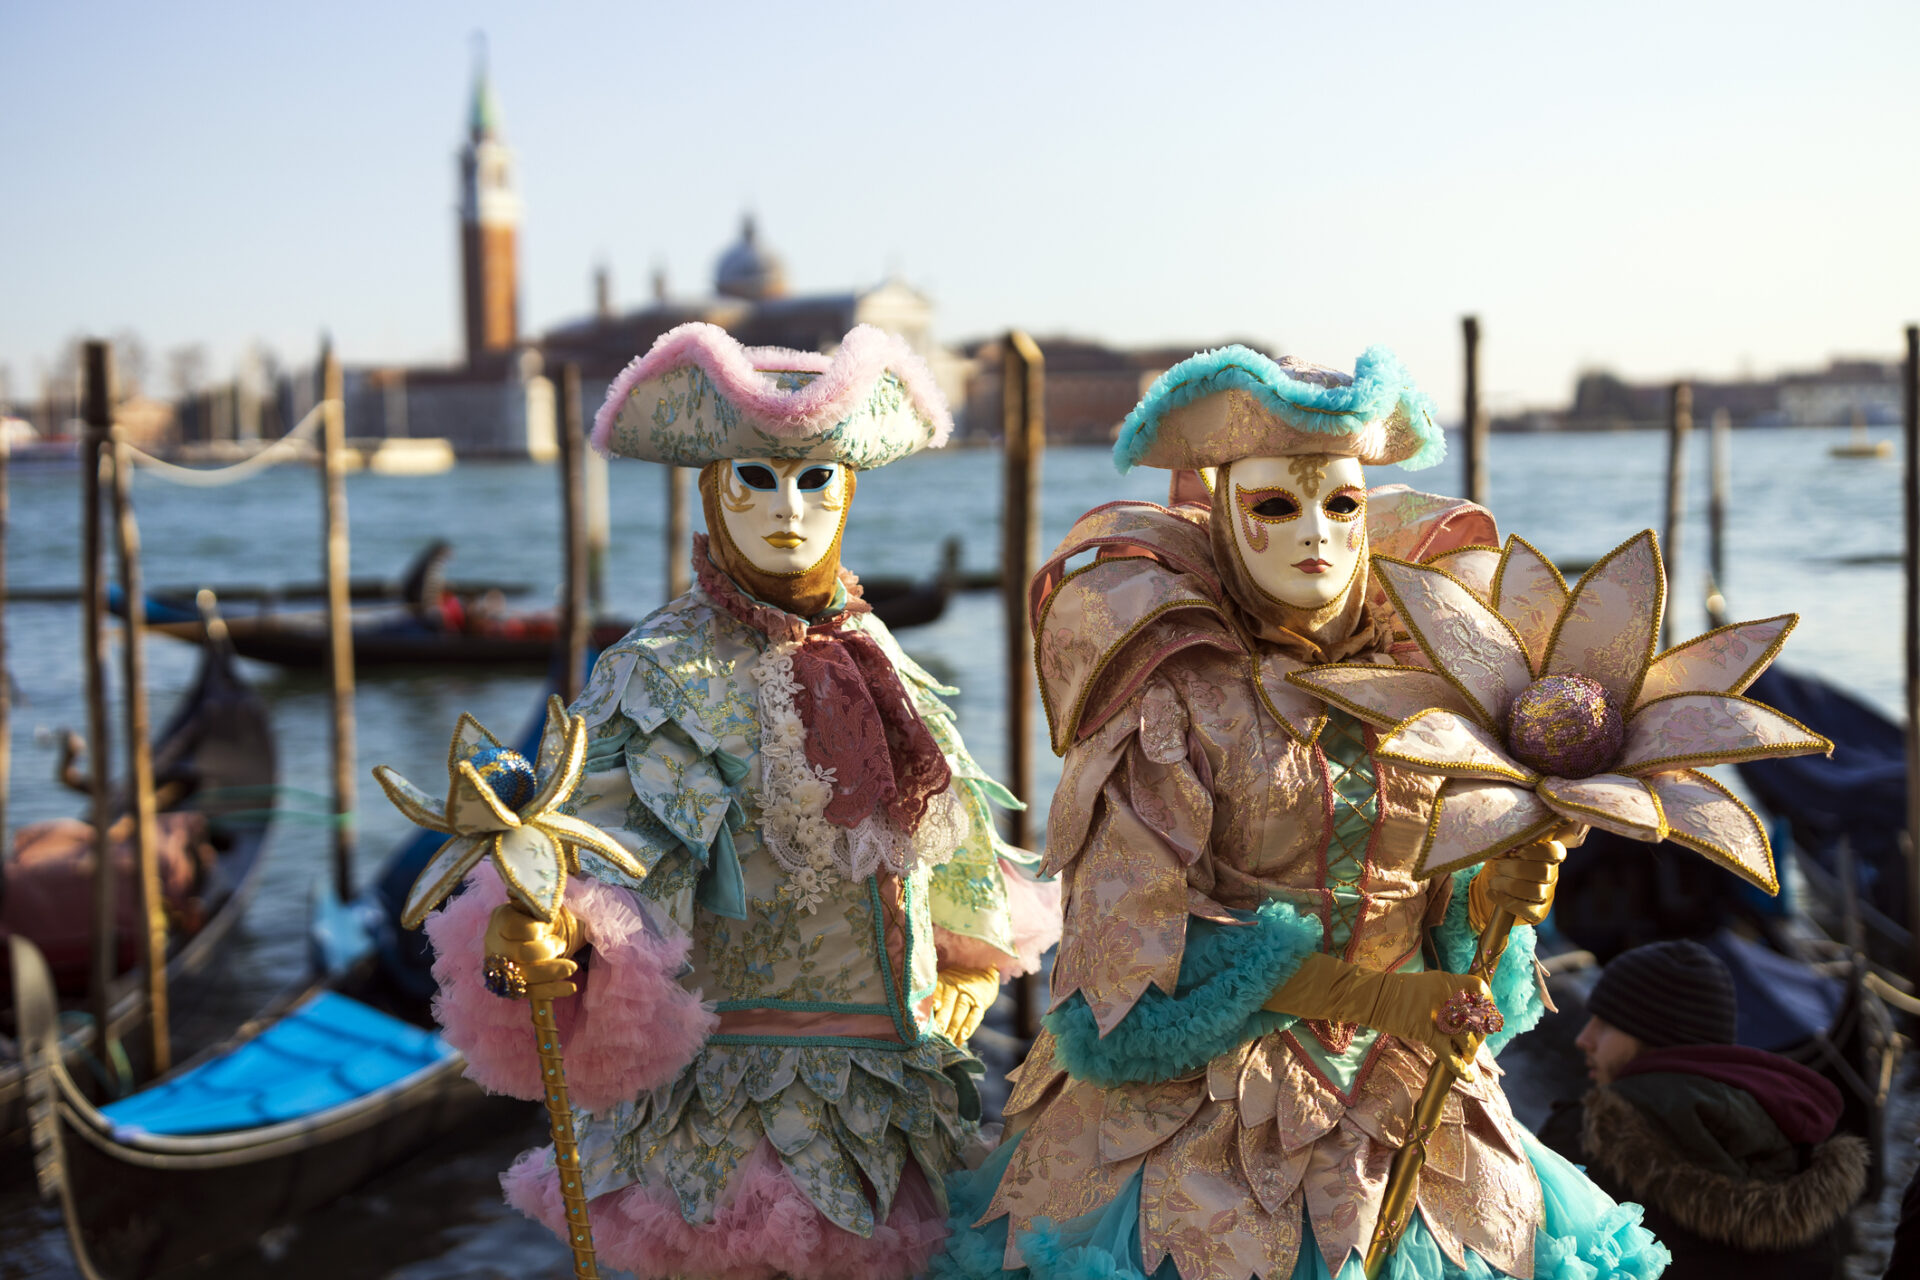 Couple wearing colorful crafted costumes at San Marco square waterfront. (Photo: istockphoto)